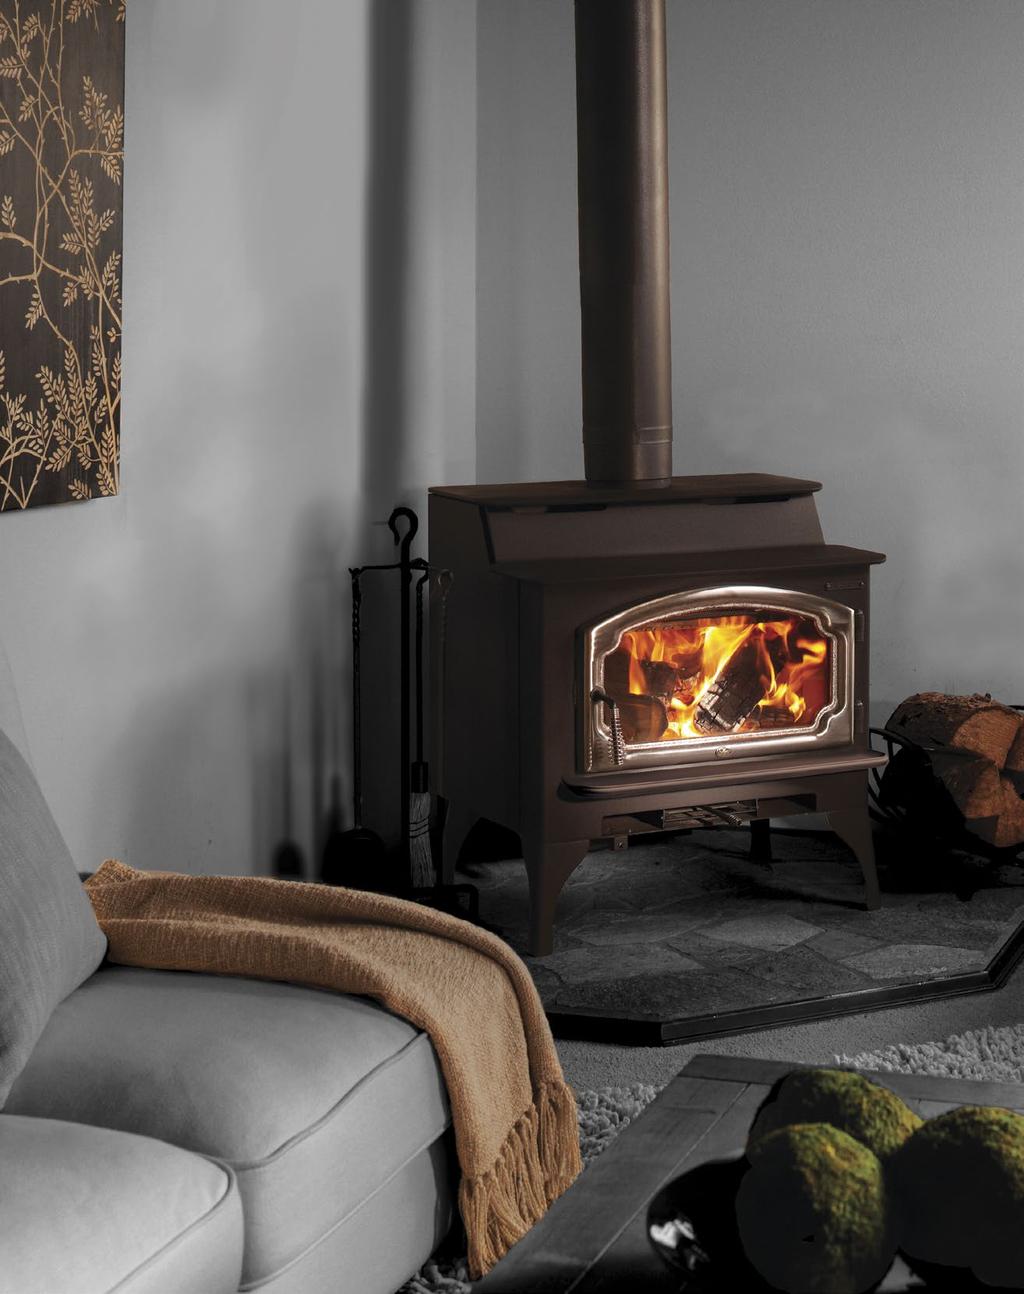 You can feel confident to know that burning wood is truly Carbon Neutral to the environment and a responsible and sustainable way to heat your home.